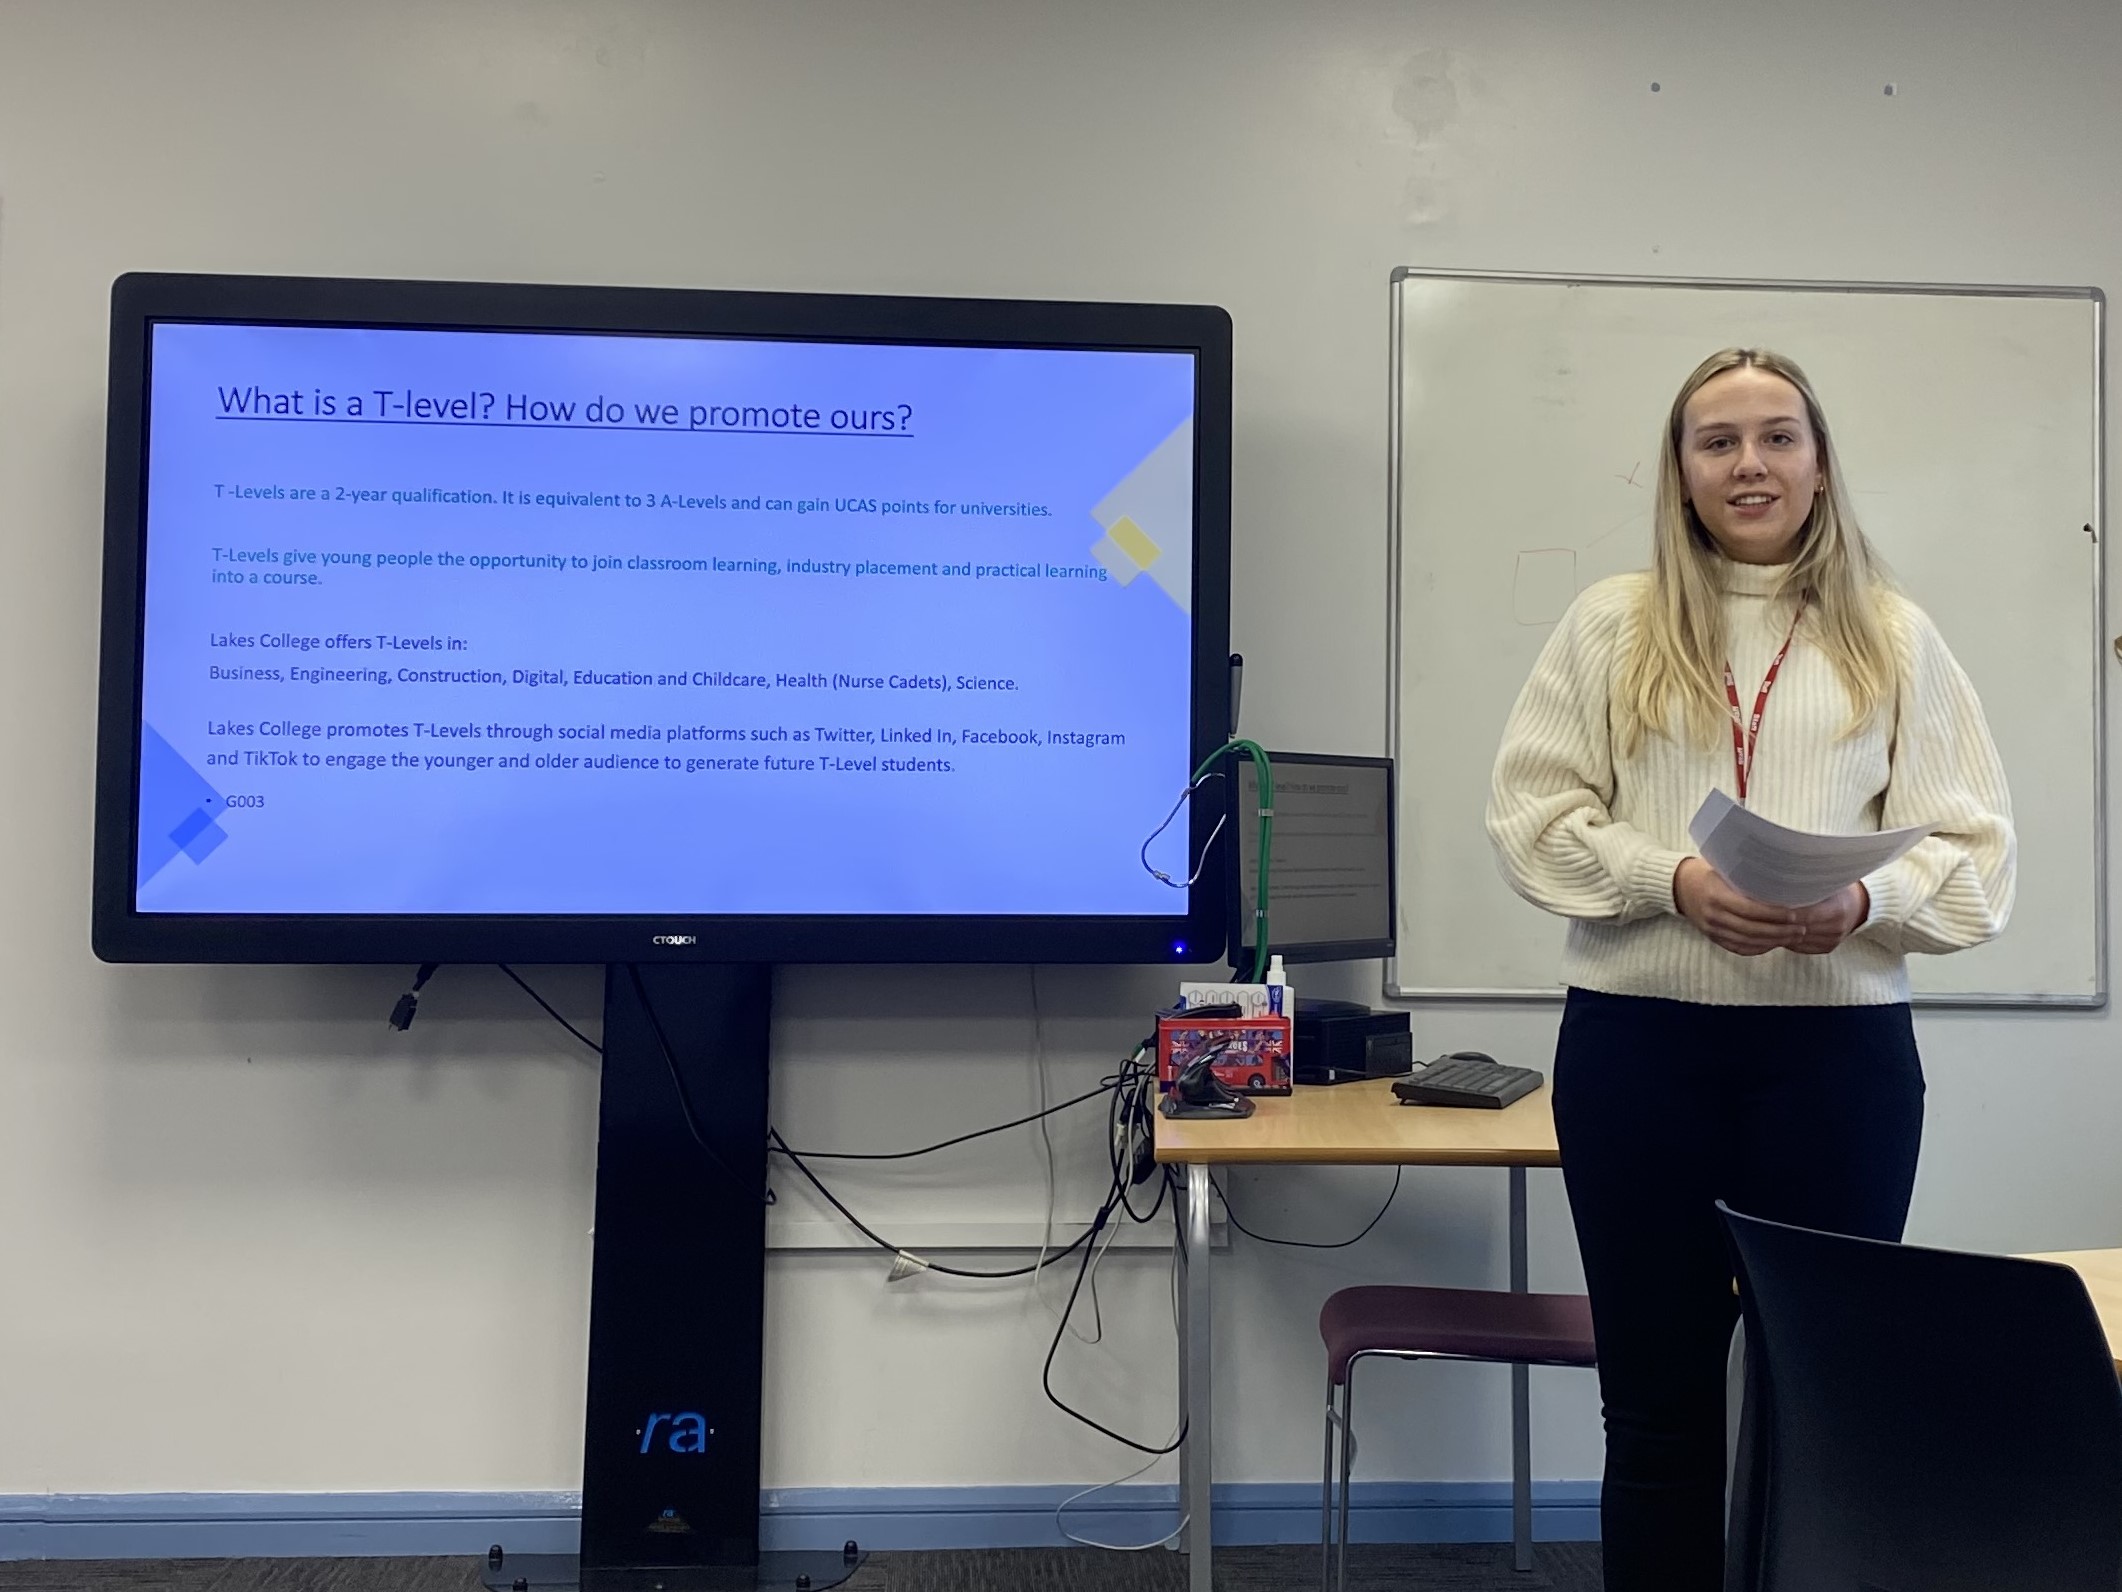 A girl with blonde hair stands in front of a computer screen to give a presentation